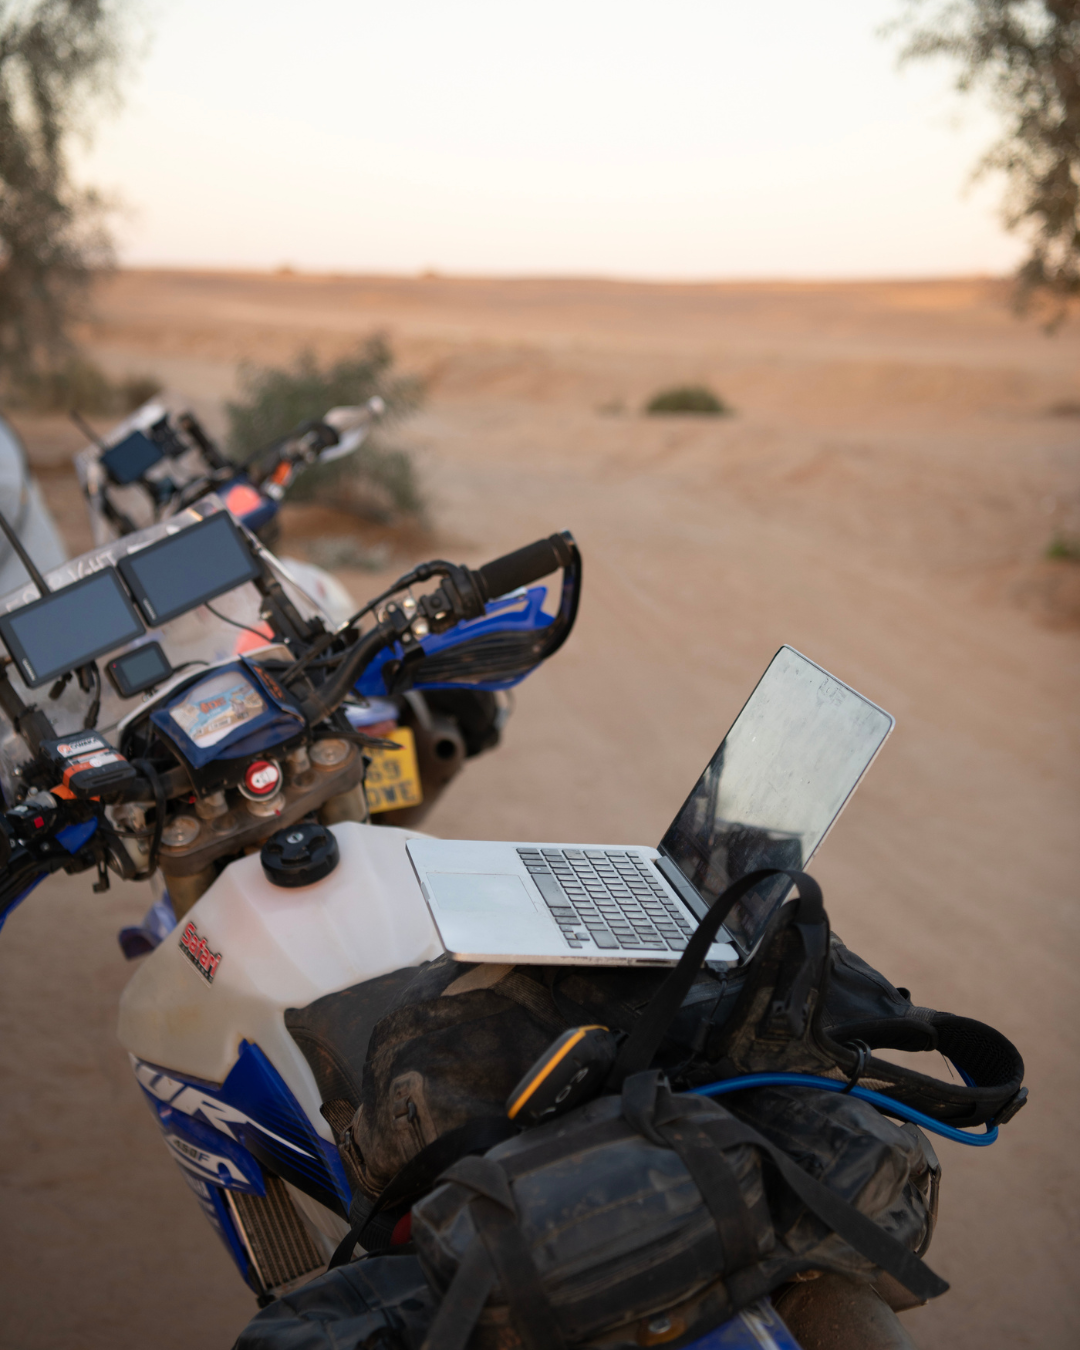 The real way to Dakar Rally adventure and passion